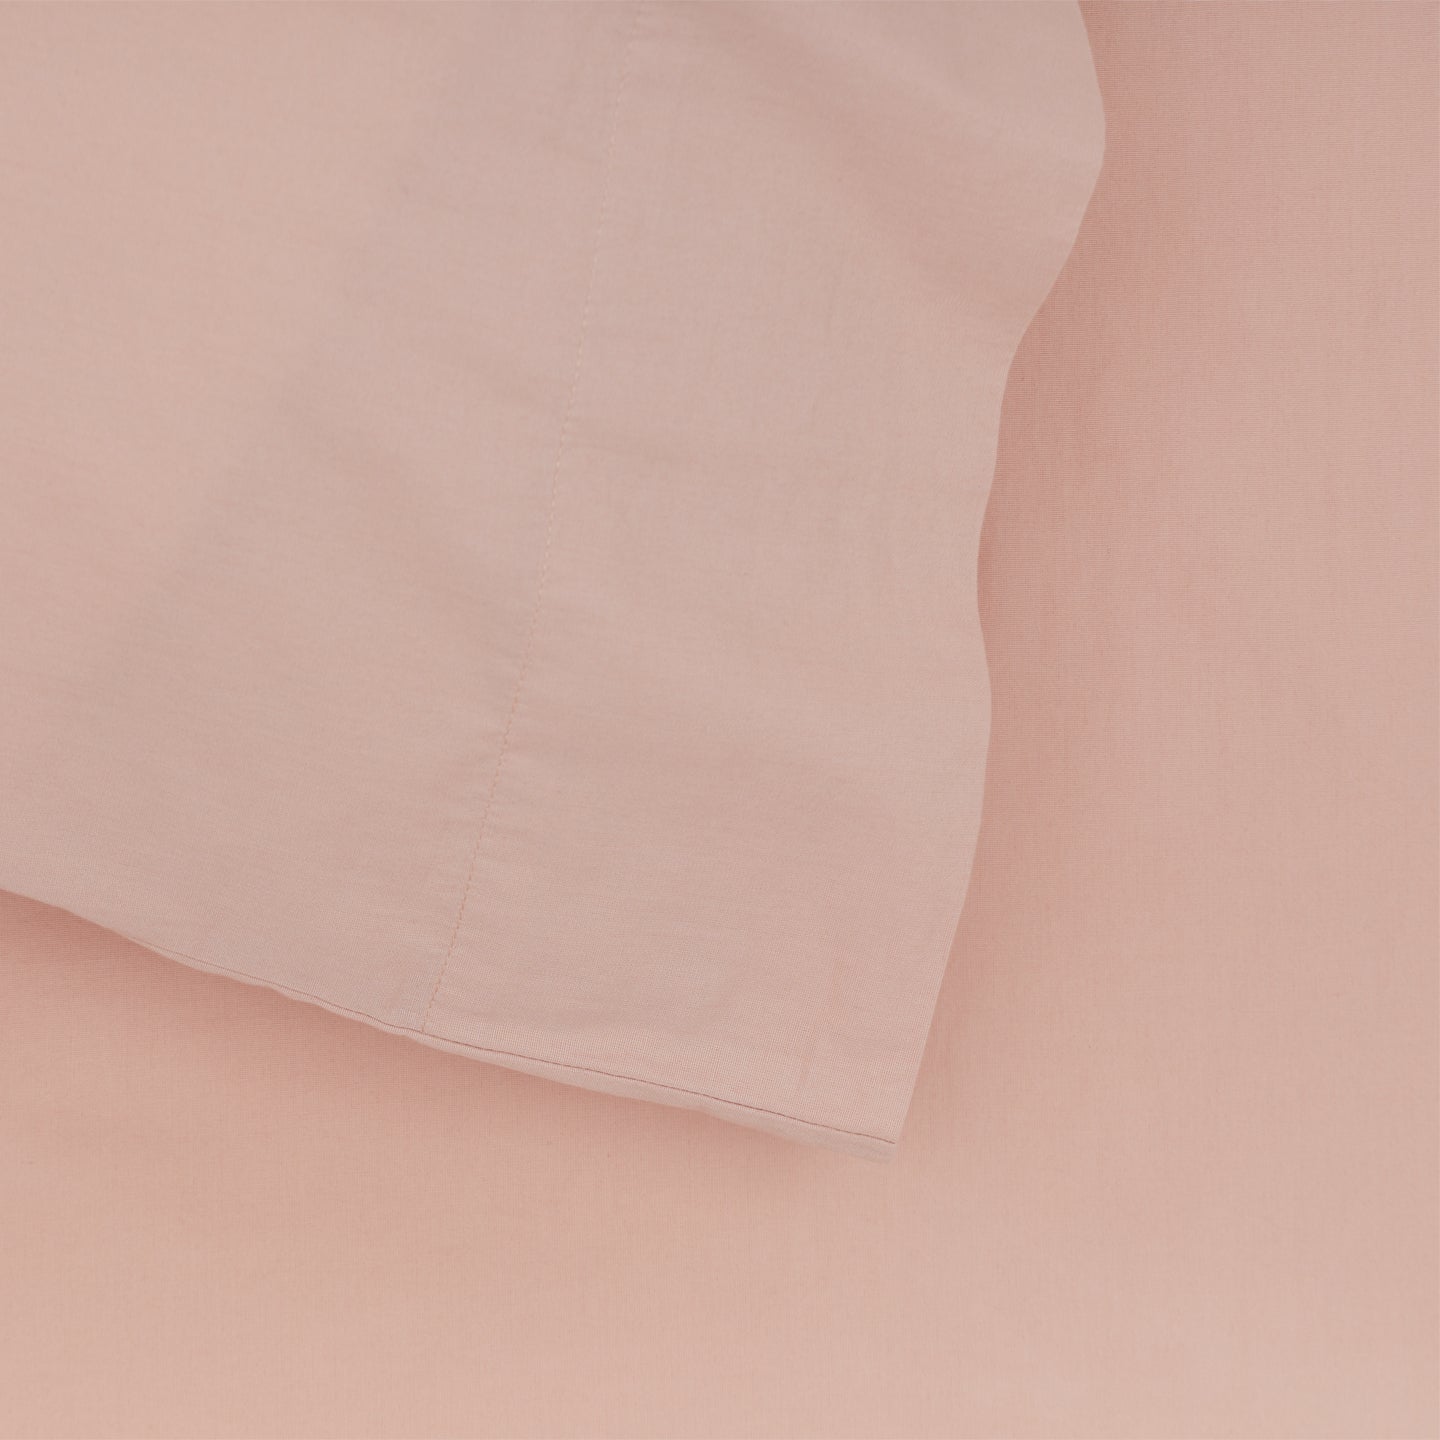 Essential Percale Pillowcases, Set of 2 - Blush